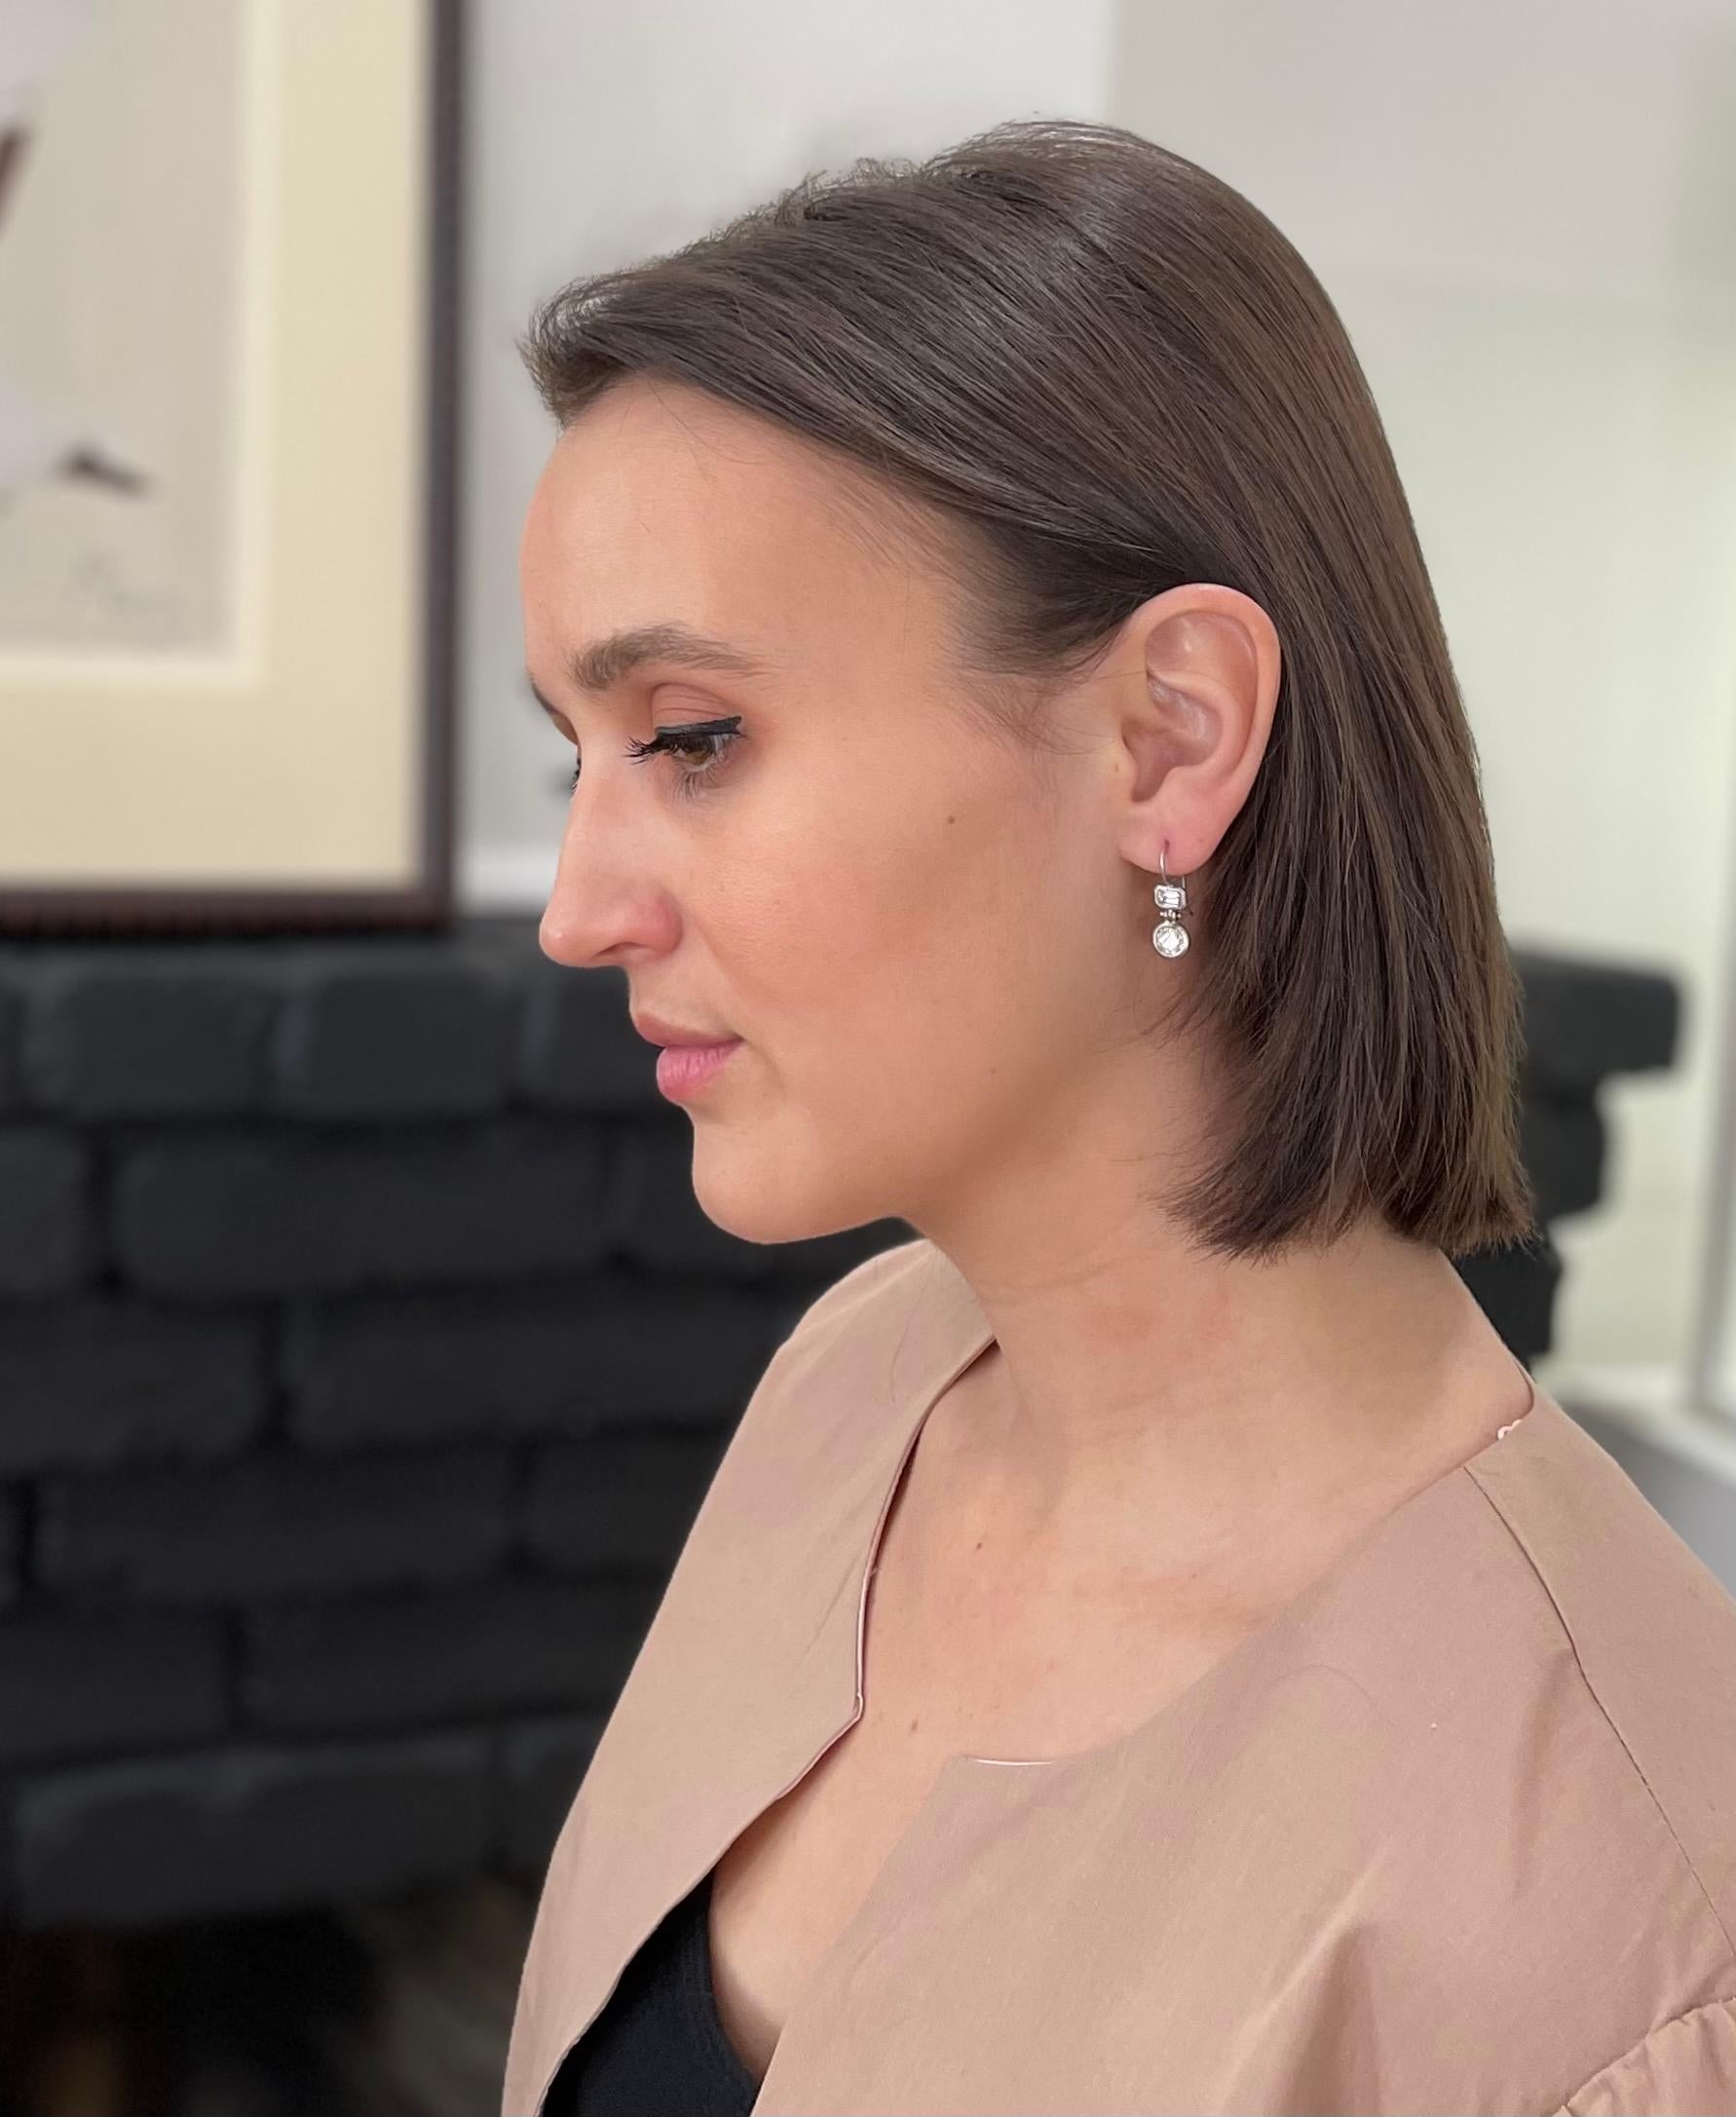 Faye Kim Platinum Double Diamond Hinge Earrings

Indulge in luxury with these double diamond drop earrings. Handcrafted in Platinum and matte finished, the emerald cut and round brilliant cut diamonds are paired together for a classic yet modern